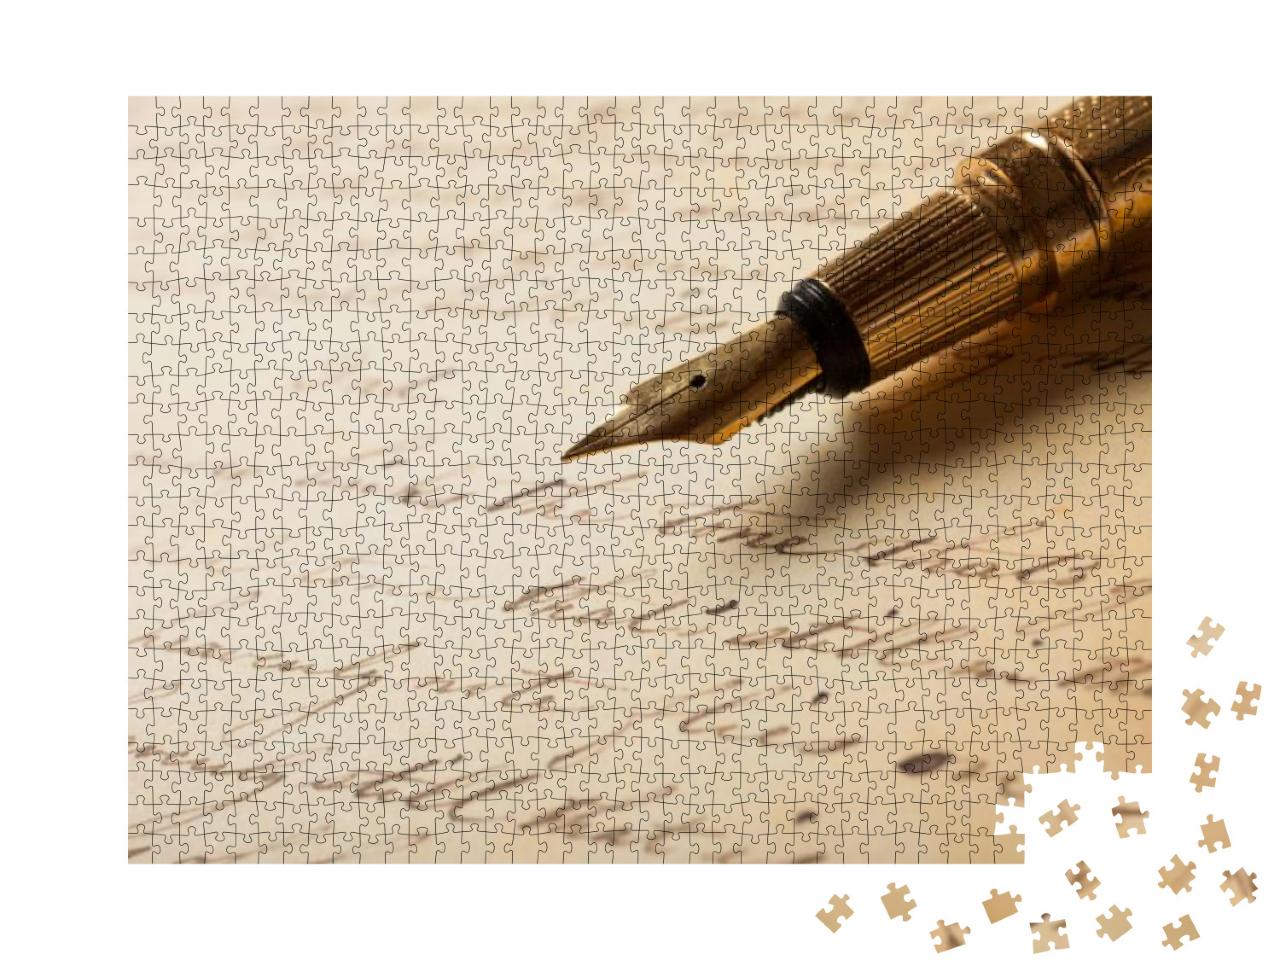 Fountain Pen on an Antique Handwritten Letter... Jigsaw Puzzle with 1000 pieces